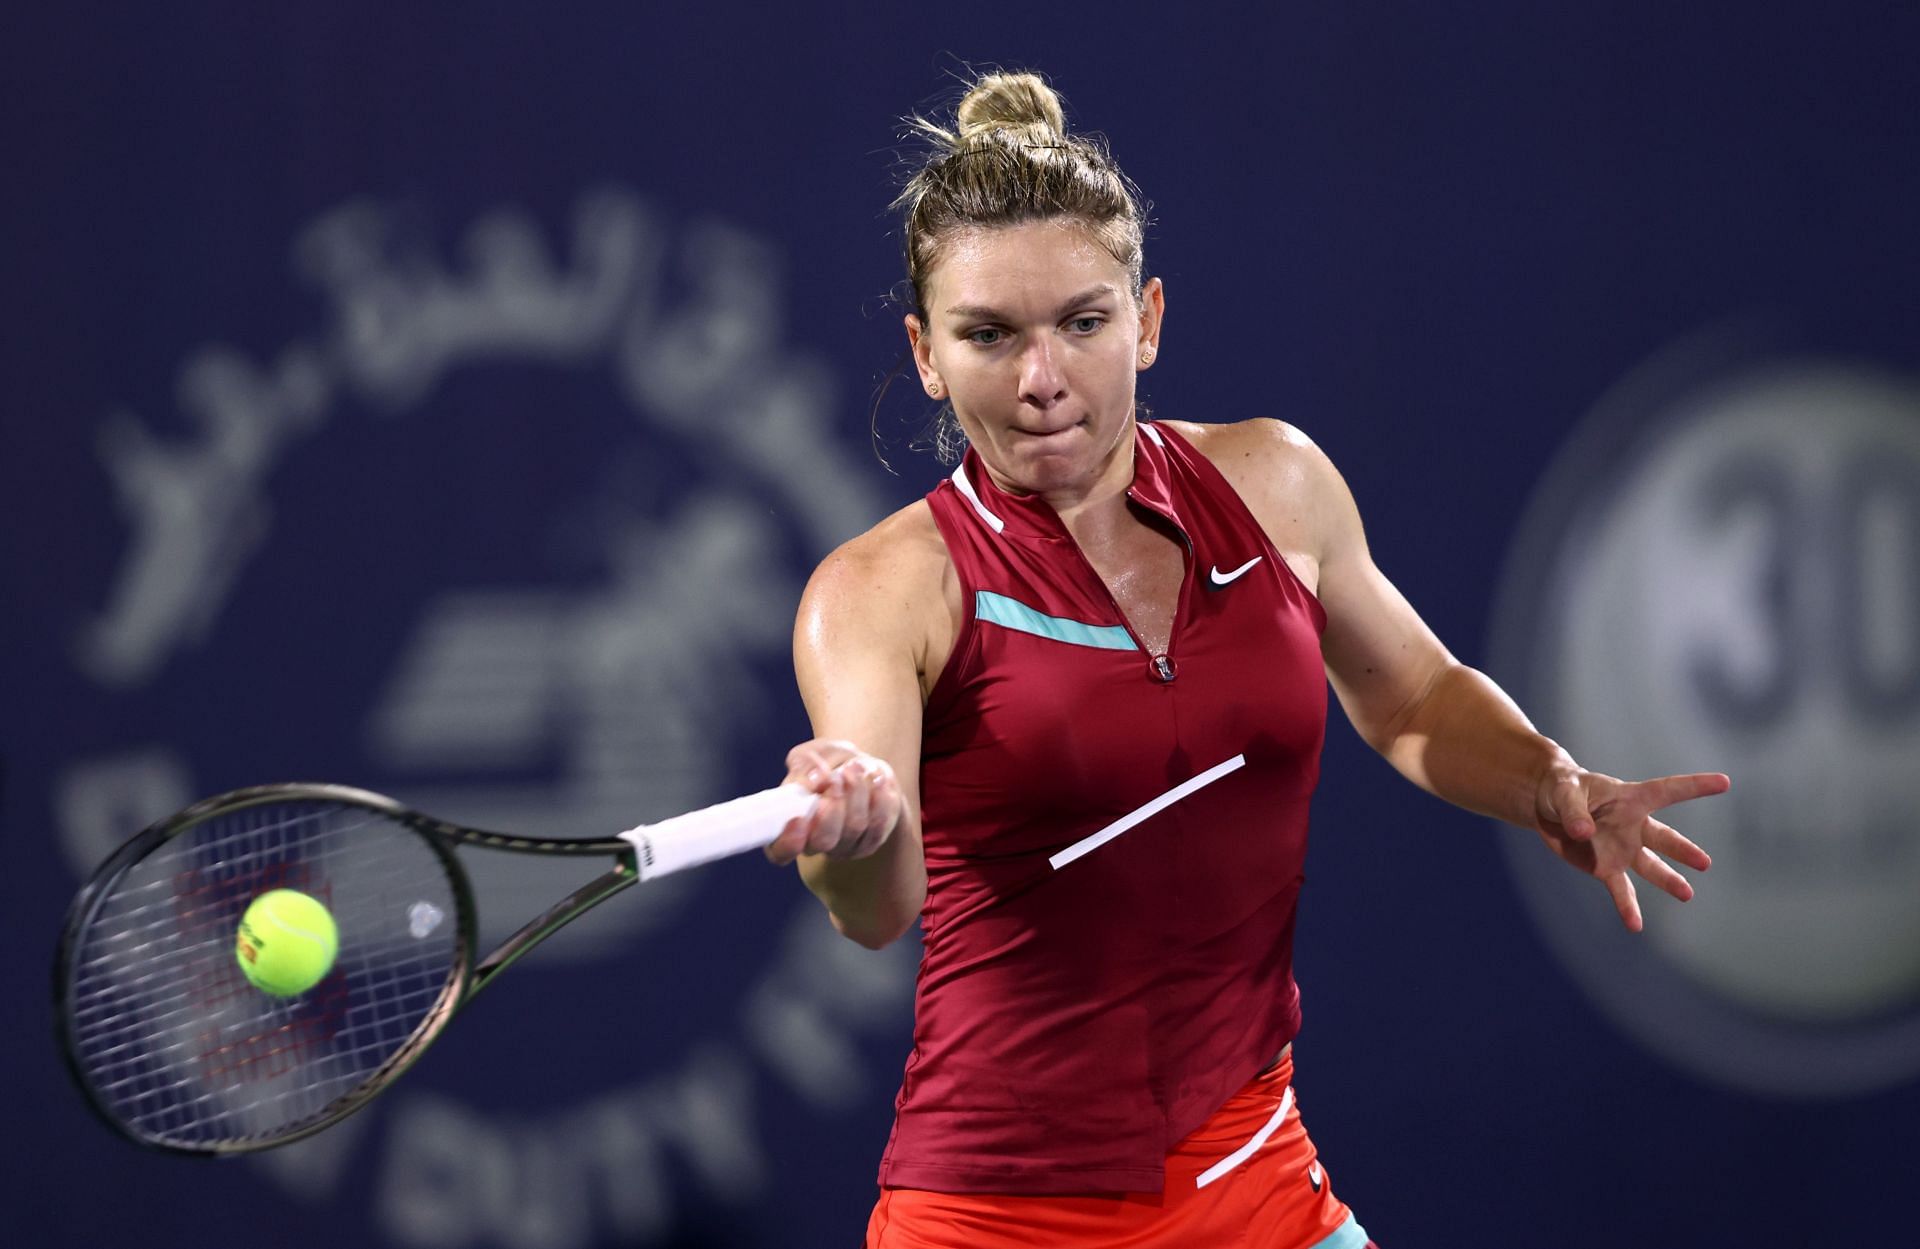 Halep in action at the Dubai Duty Free Tennis Championships